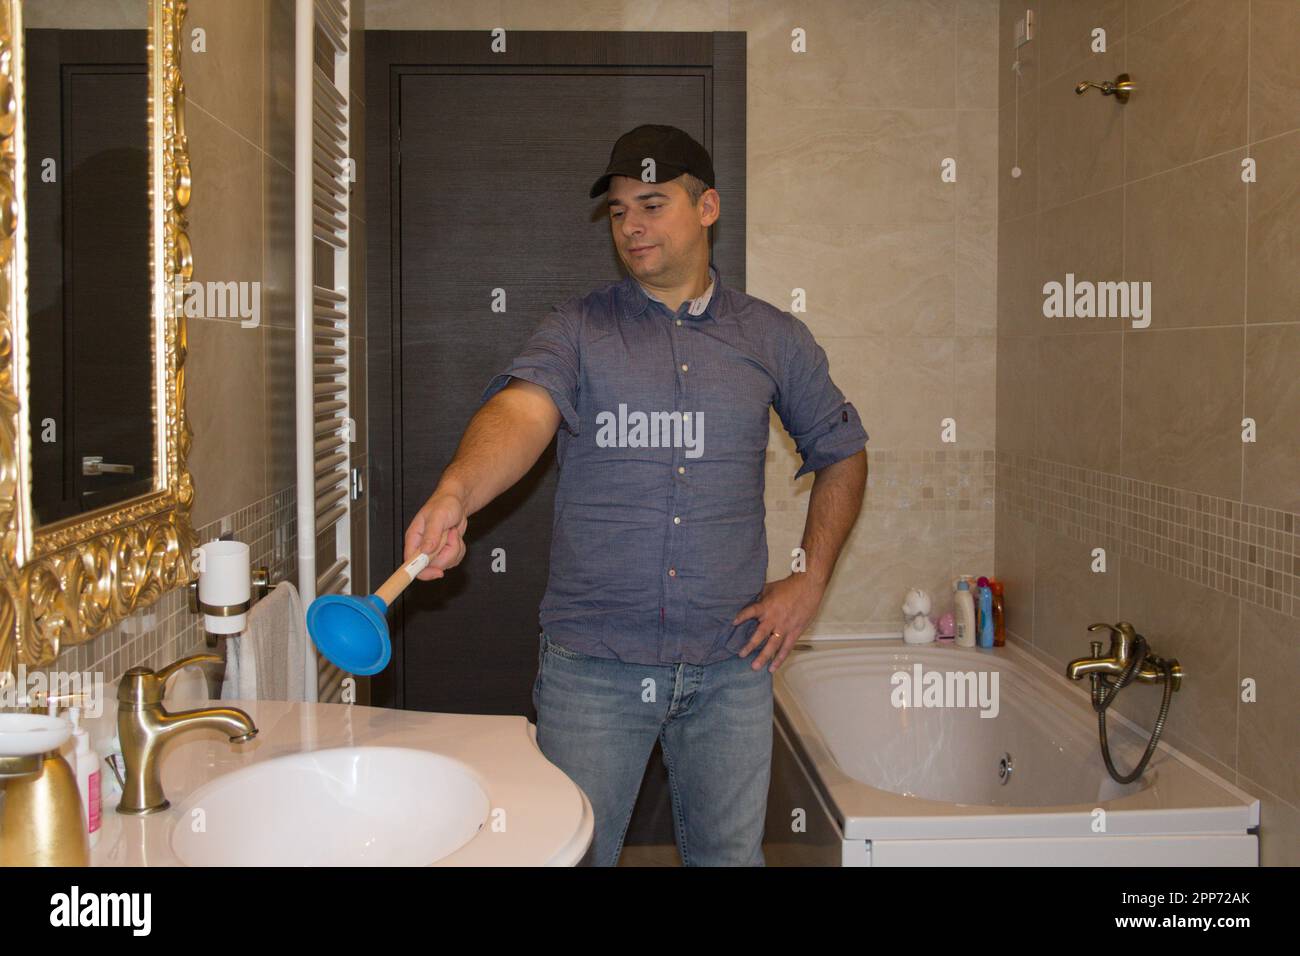 https://c8.alamy.com/comp/2PP72AK/image-of-a-plumber-in-a-bathroom-pointing-with-a-plunger-at-a-clogged-sink-that-needs-repairing-diy-work-at-home-2PP72AK.jpg